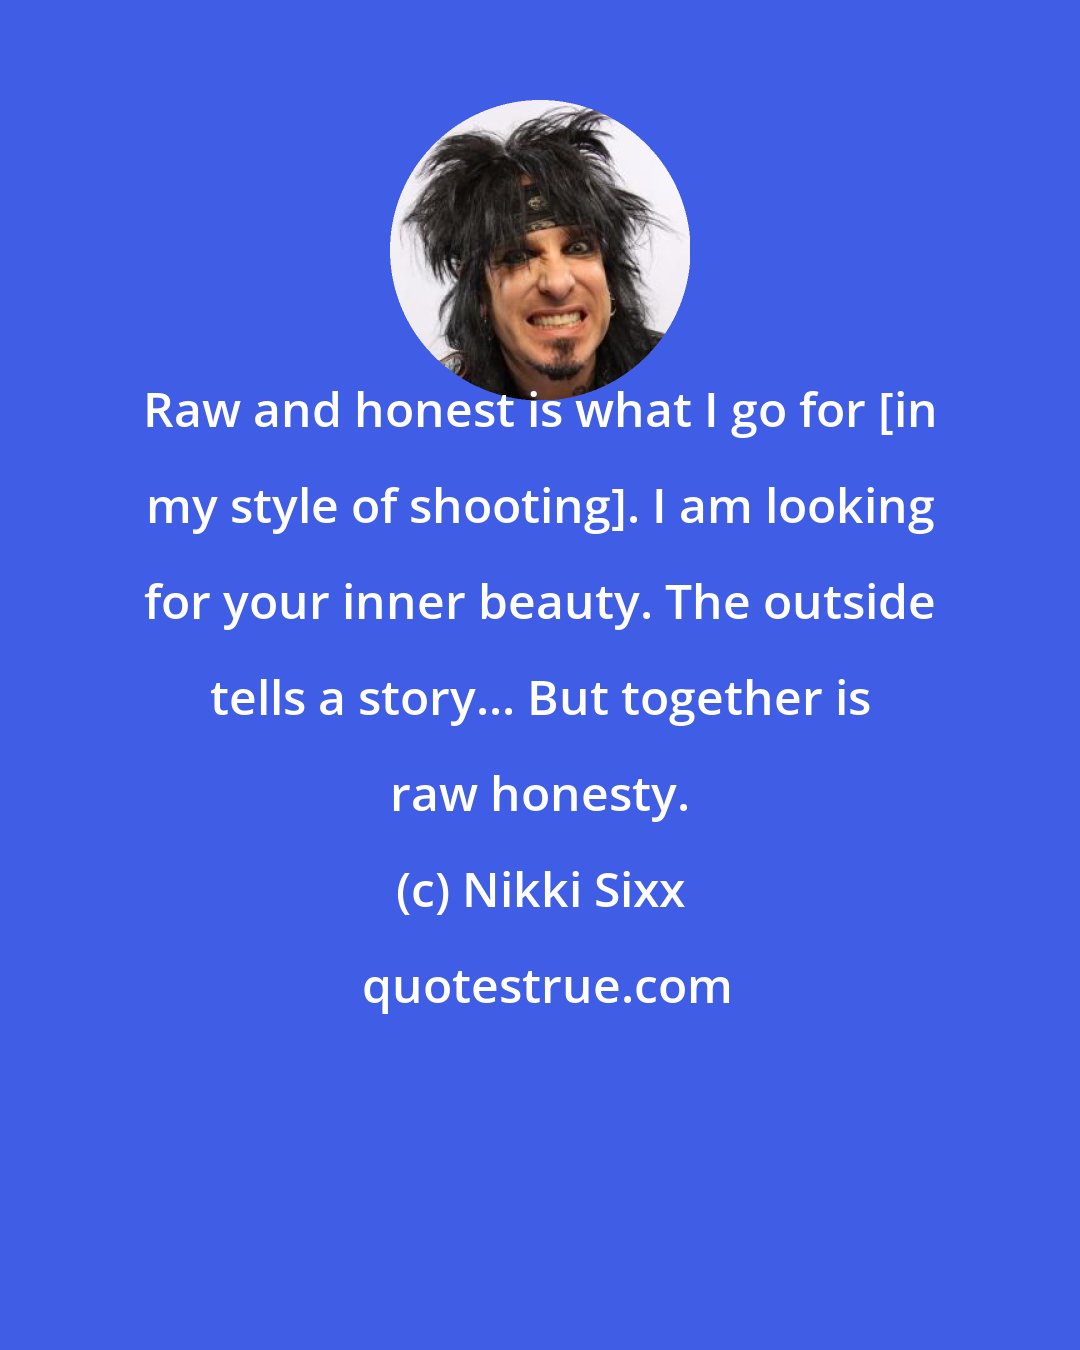 Nikki Sixx: Raw and honest is what I go for [in my style of shooting]. I am looking for your inner beauty. The outside tells a story... But together is raw honesty.